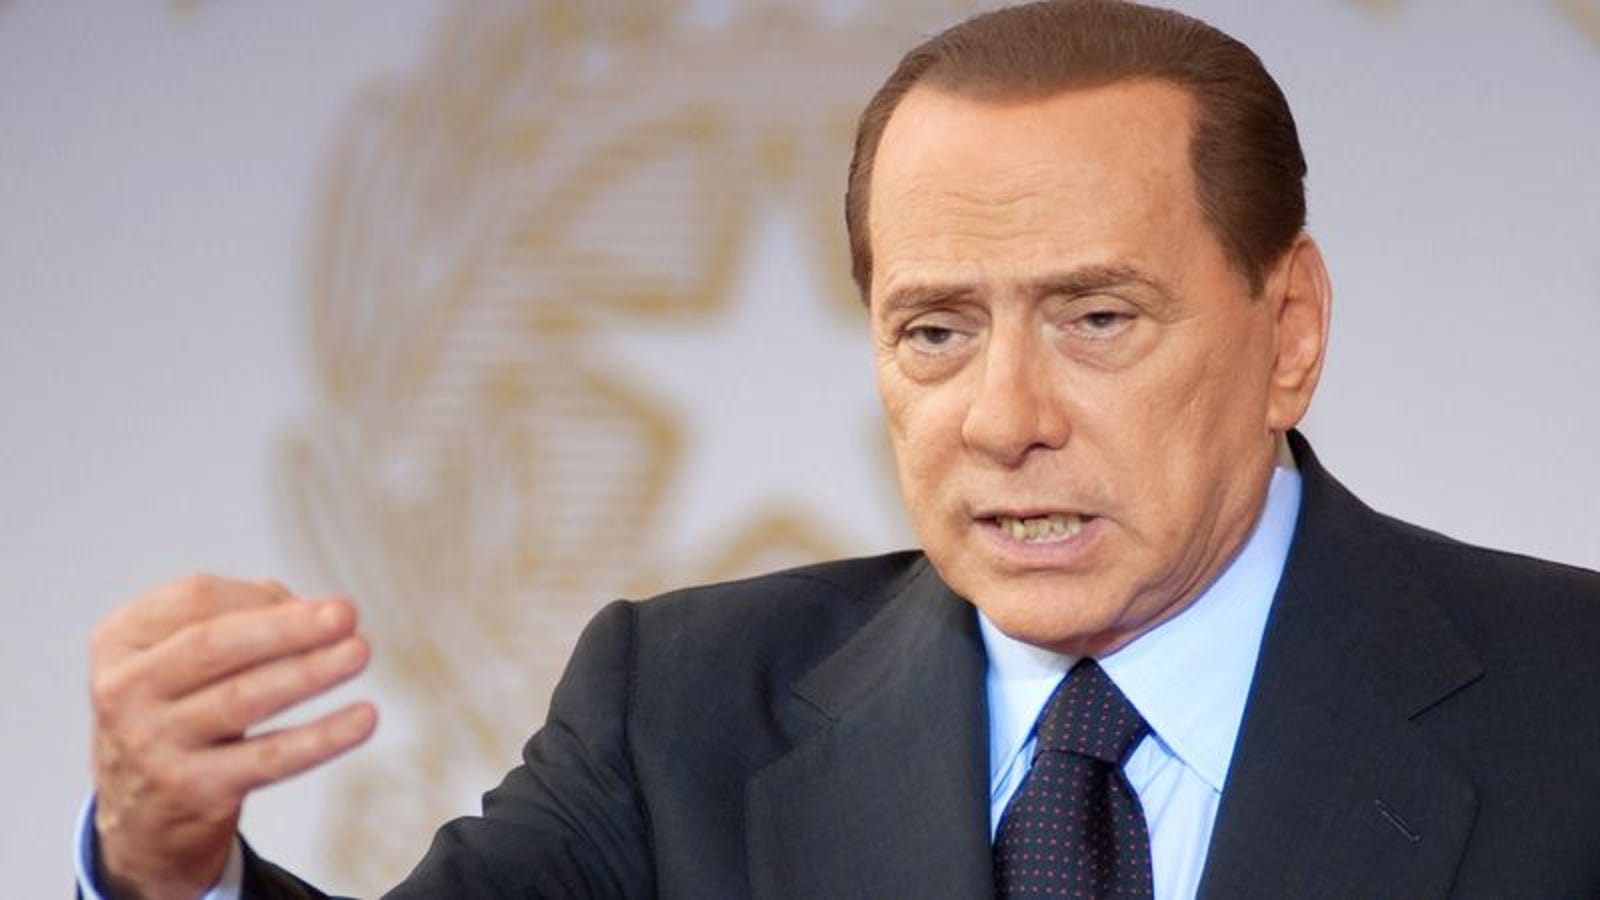 Silvio Berlusconi Swears Dancer Was Of Legal Age When He Paid Her For Sex Using State Money 4963